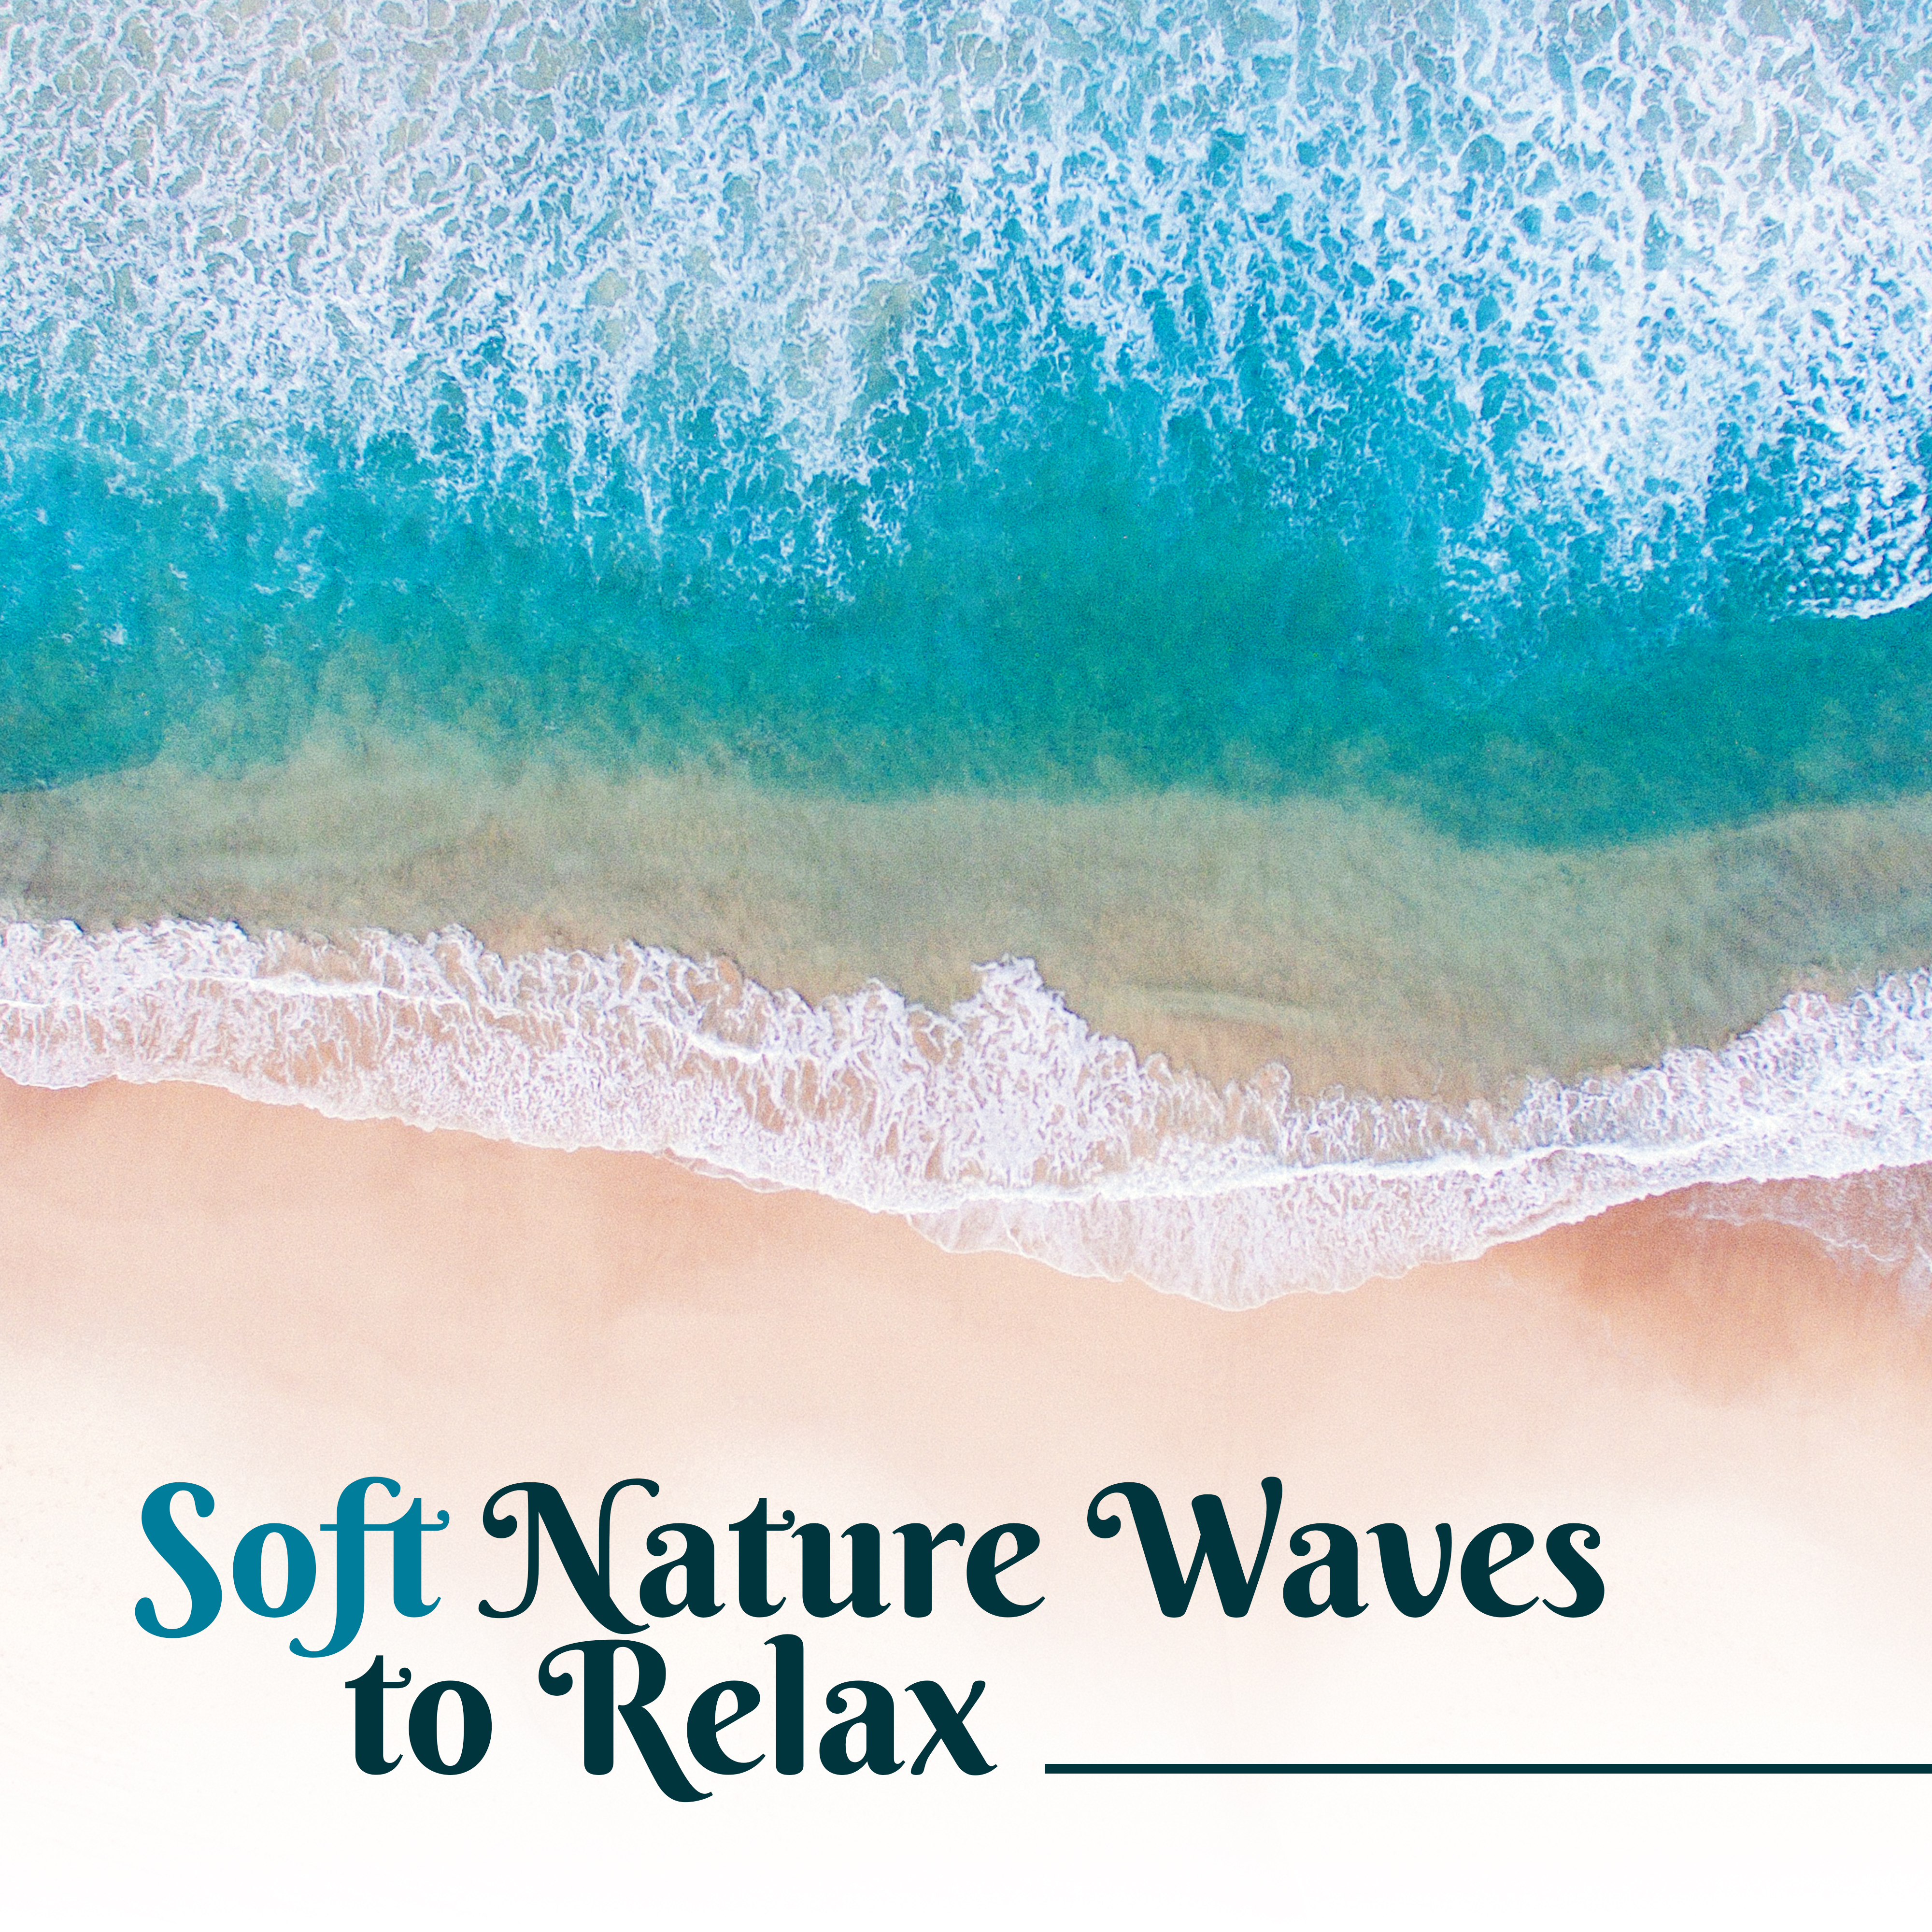 Soft Nature Waves to Relax – Easy Listening, Stress Relief, Peaceful Music to Calm Down, Rest with New Age